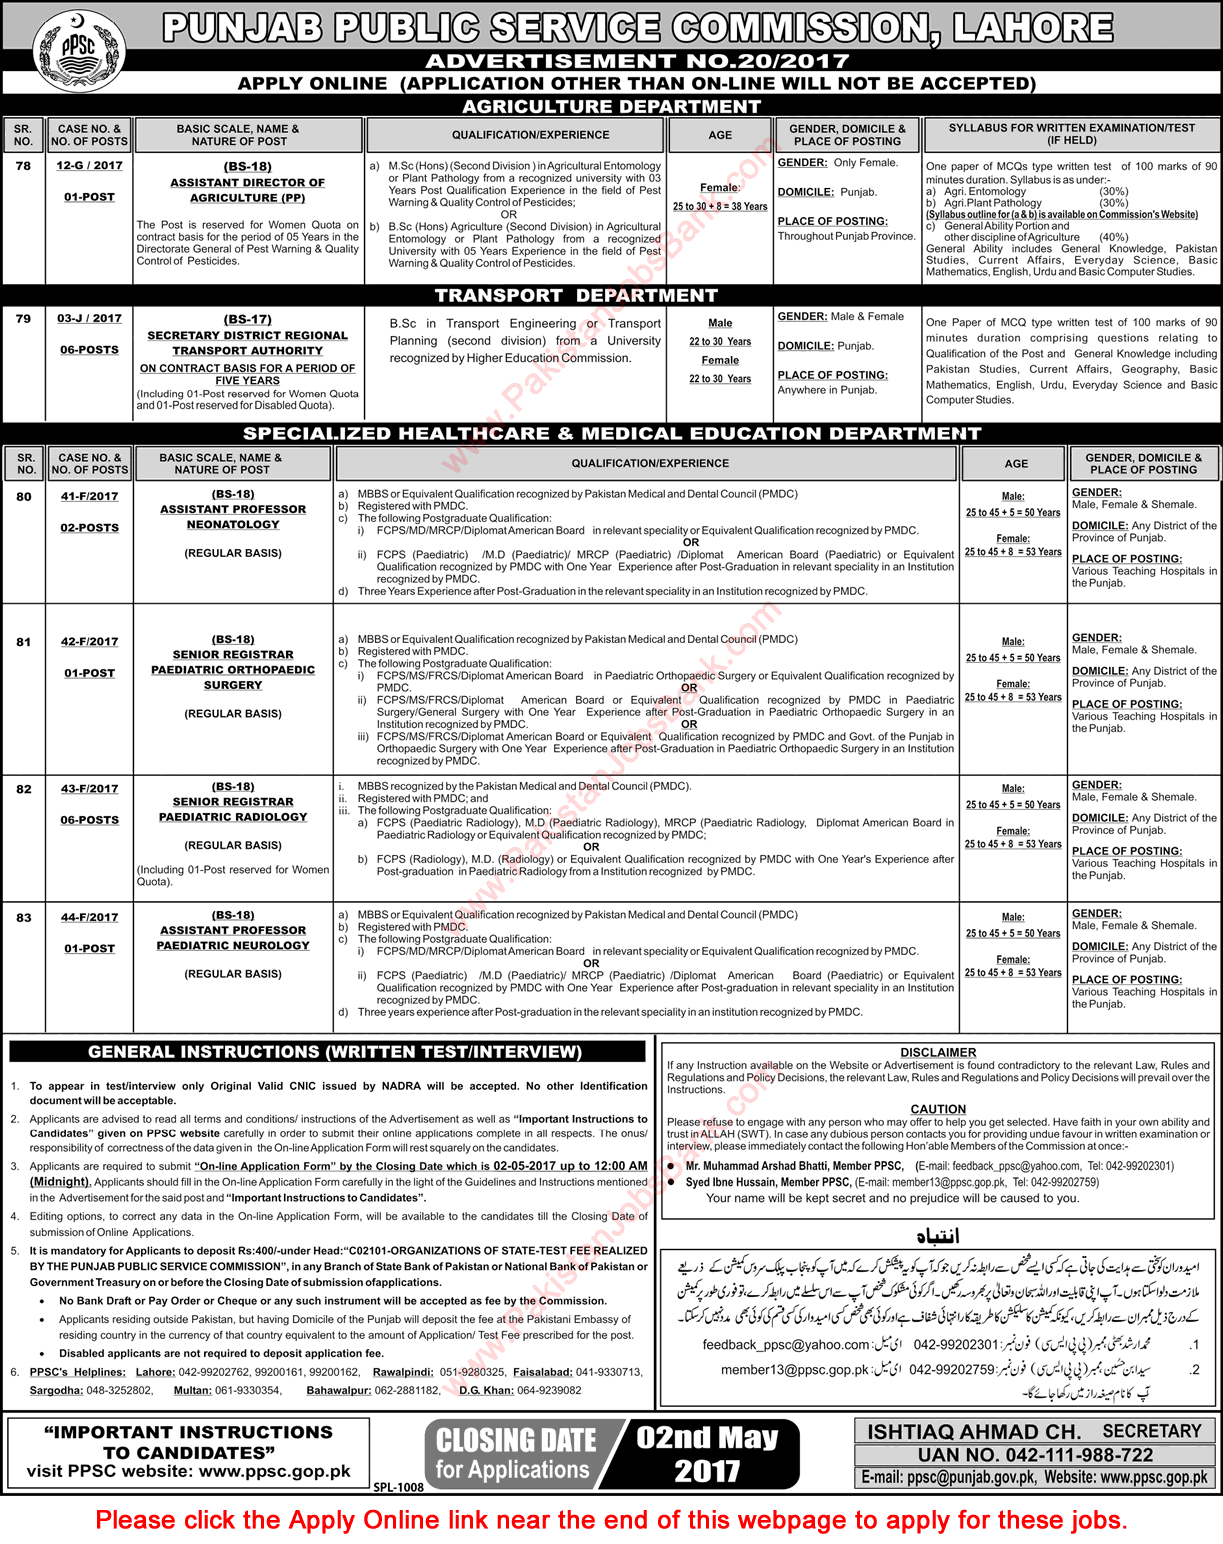 PPSC Jobs April 2017 Consolidated Advertisement No 20/2017 Apply Online Latest